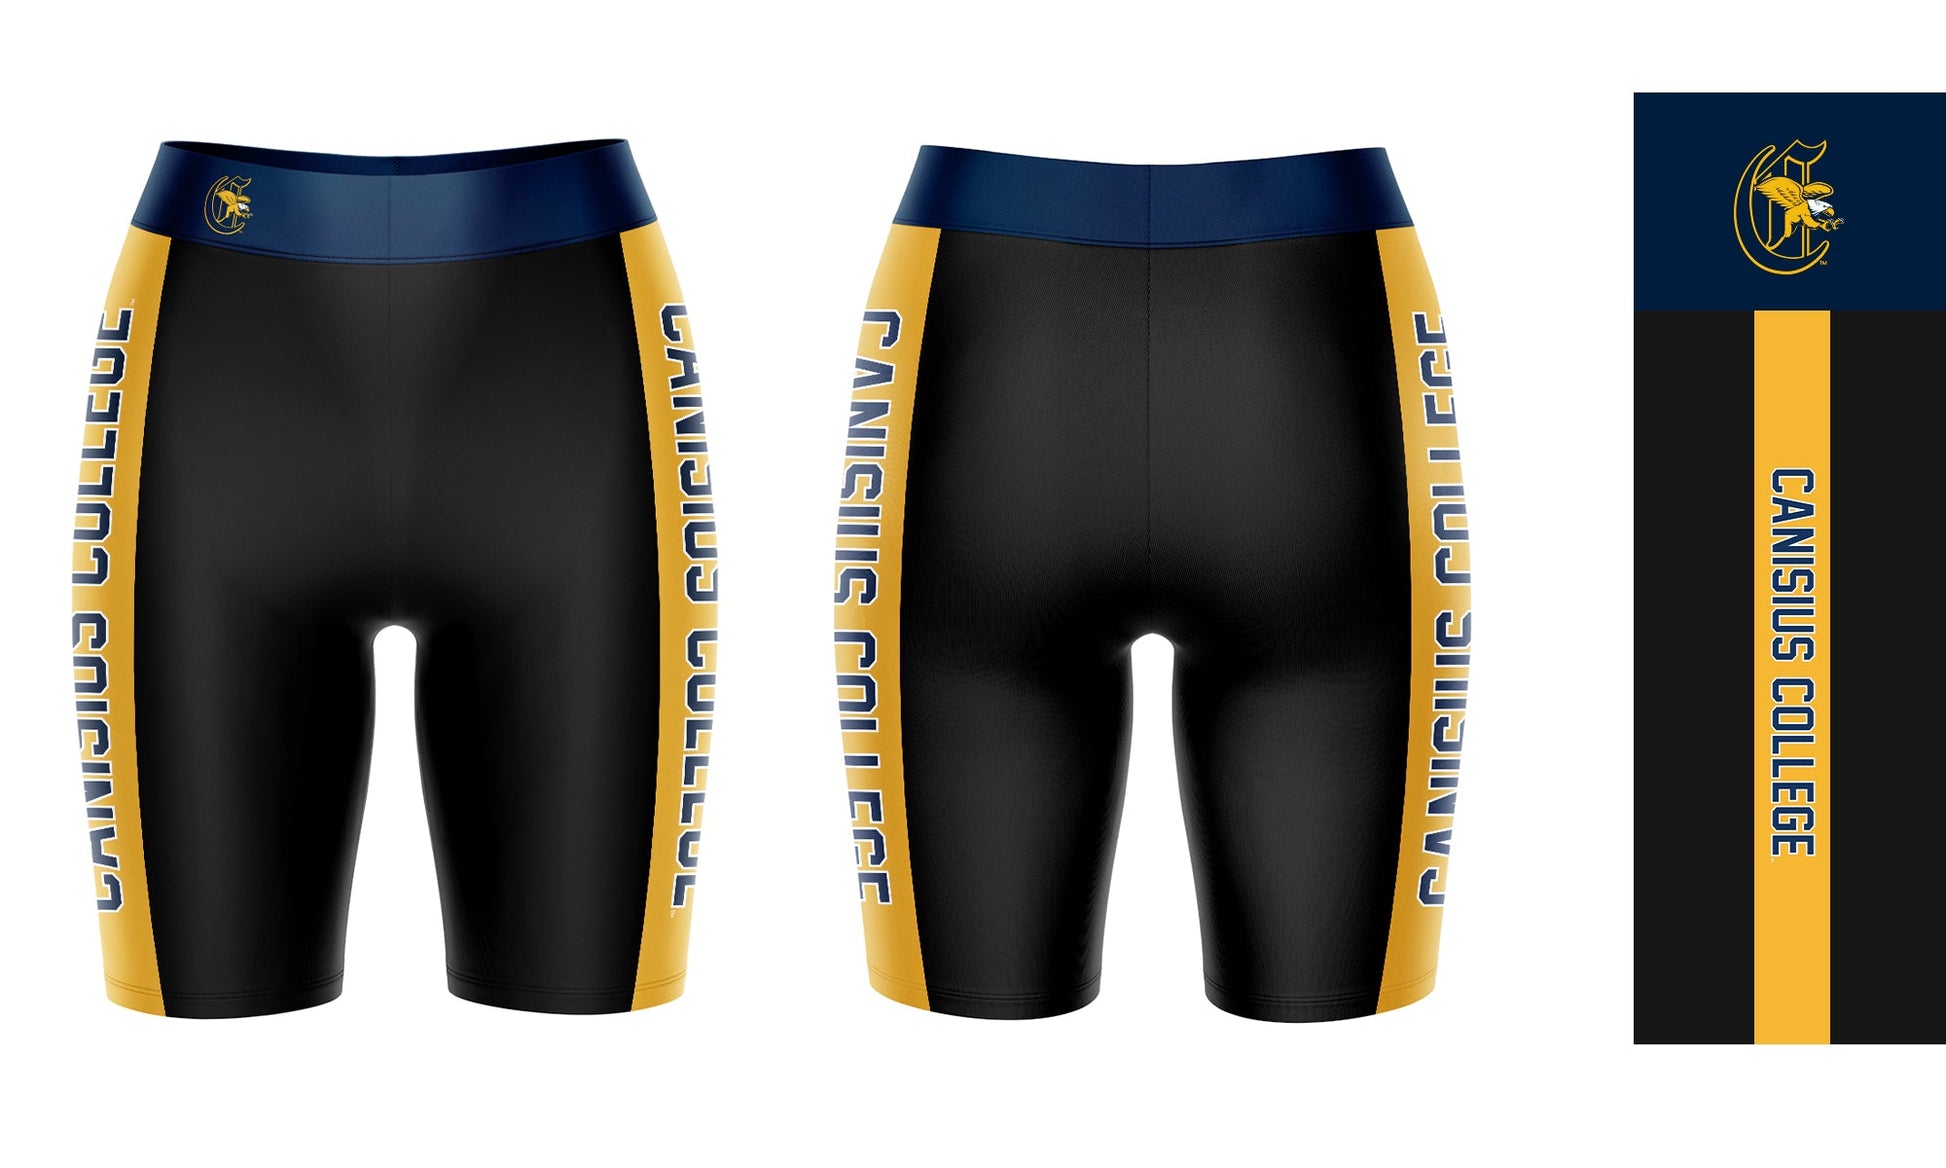 Canisius College Griffs Vive La Fete Game Day Logo on Waistband and Gold Stripes Black Women Bike Short 9 Inseam